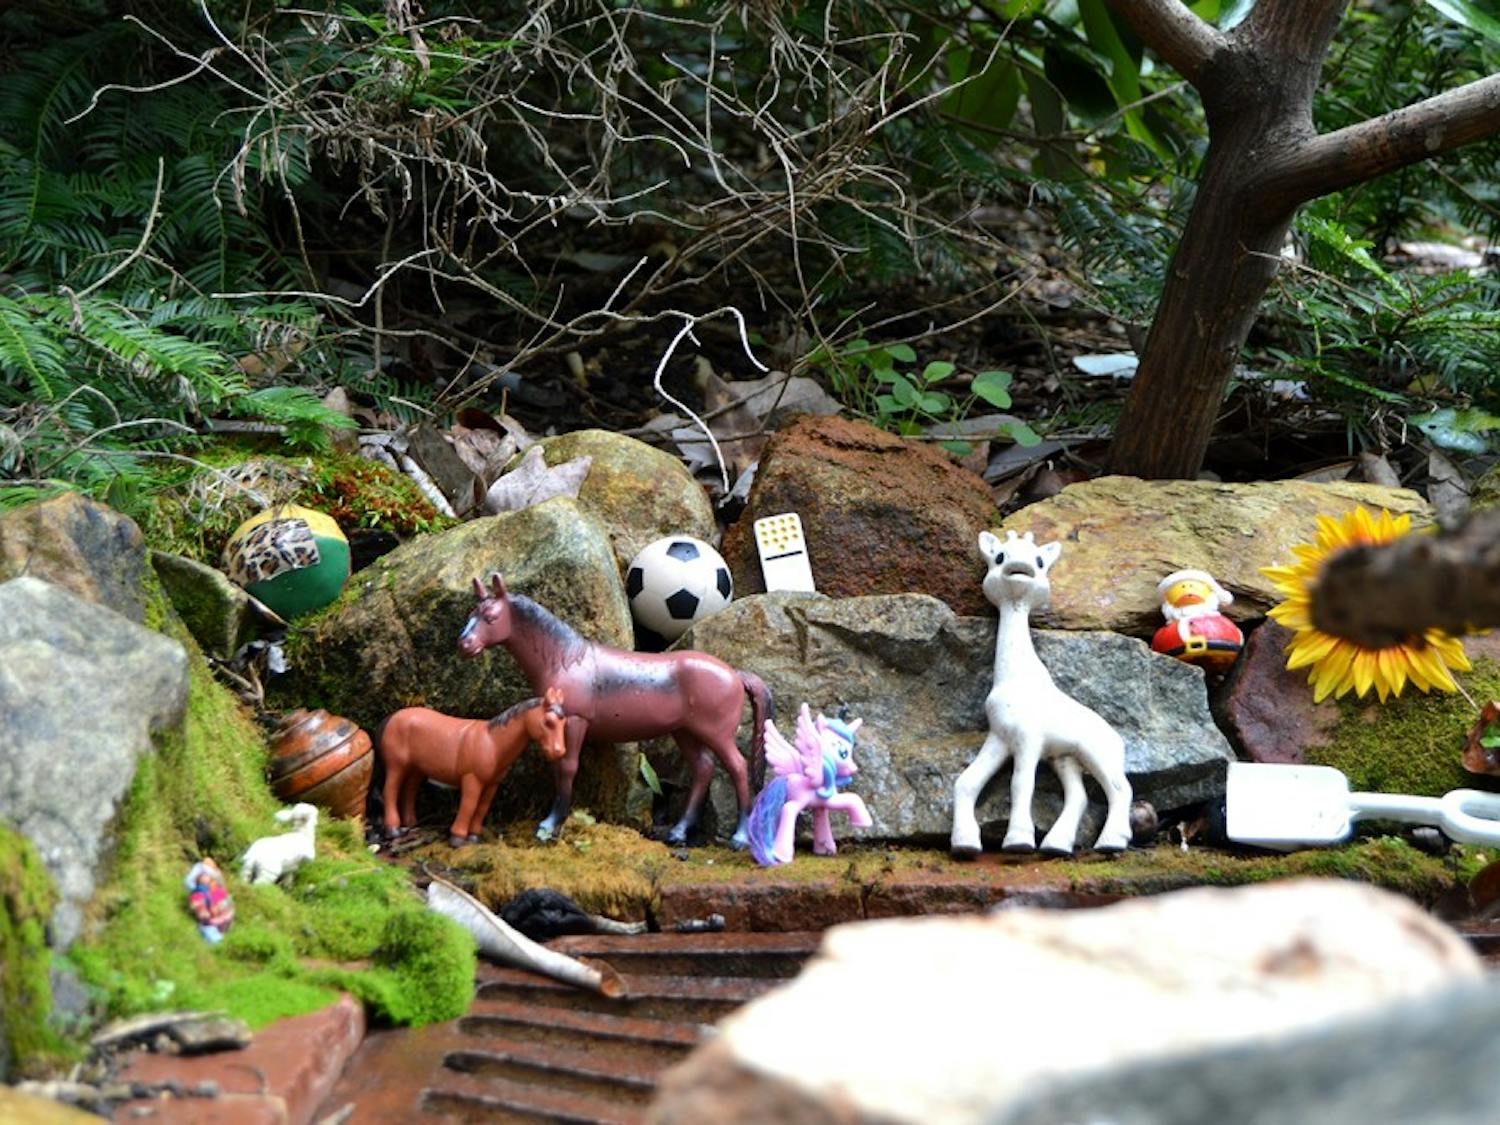 The Island of Misfit Toys, located in the Coker Arboretum, is a collection of abandoned toys found in the Arboretum and collected by the Arboretum staff.